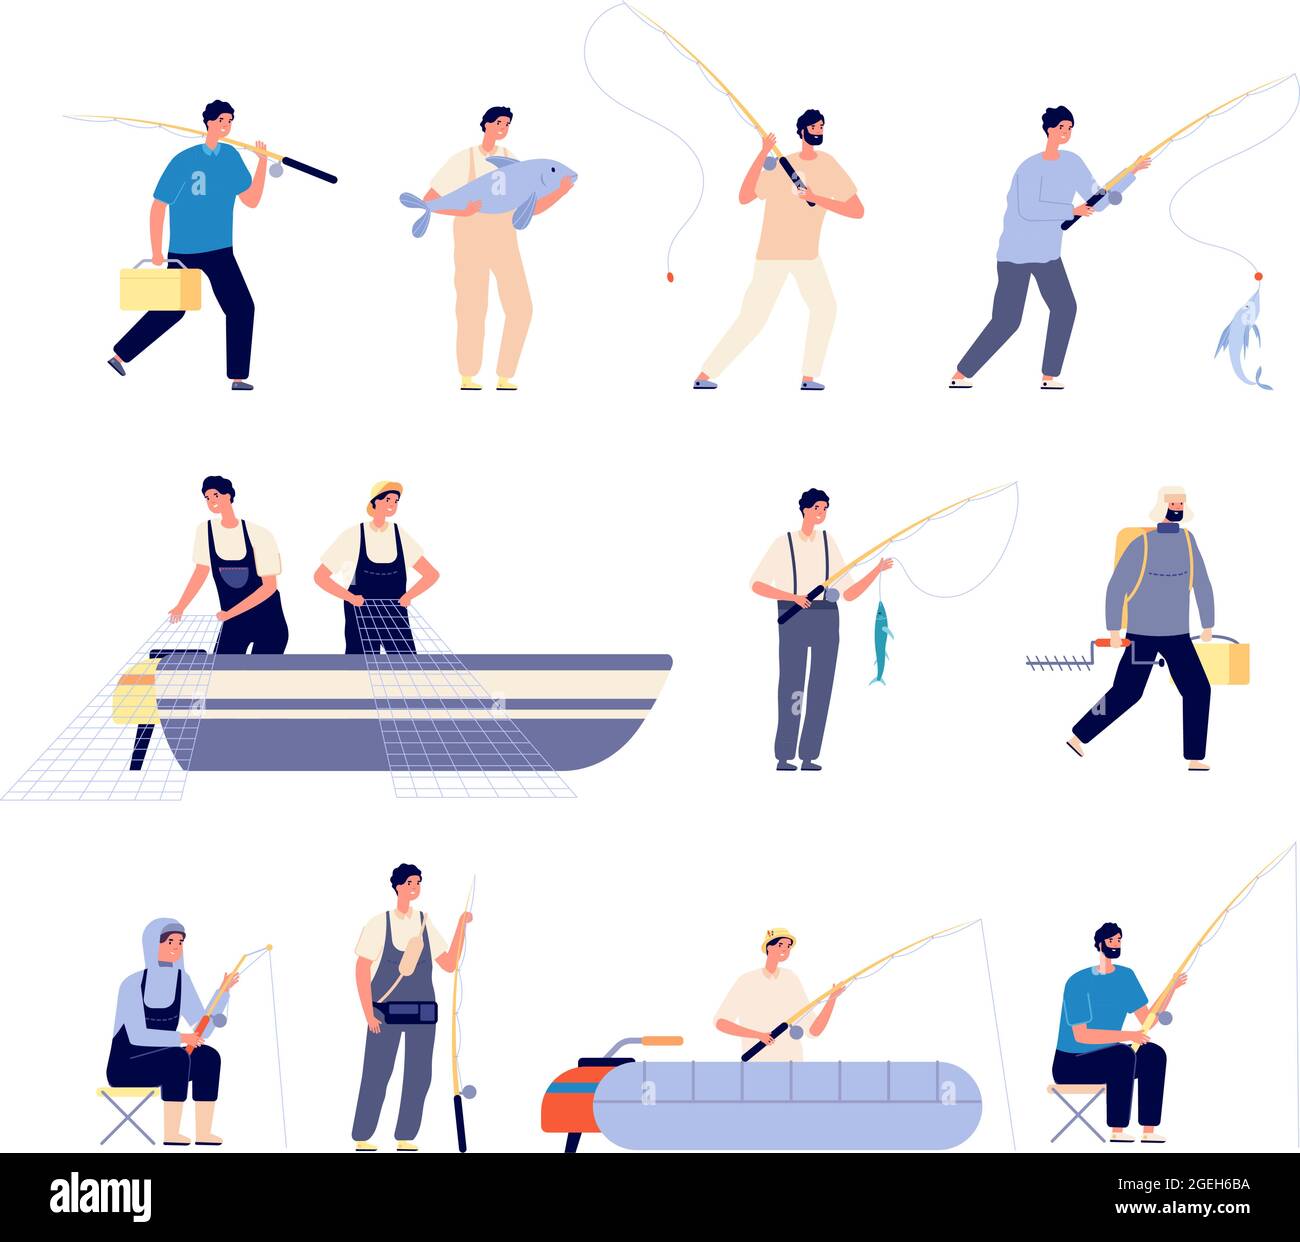 Fisherman characters. Rubber boat, fishing man with equipment. Seasonal activity, male holds fish. Commercial fishery vector illustration Stock Vector